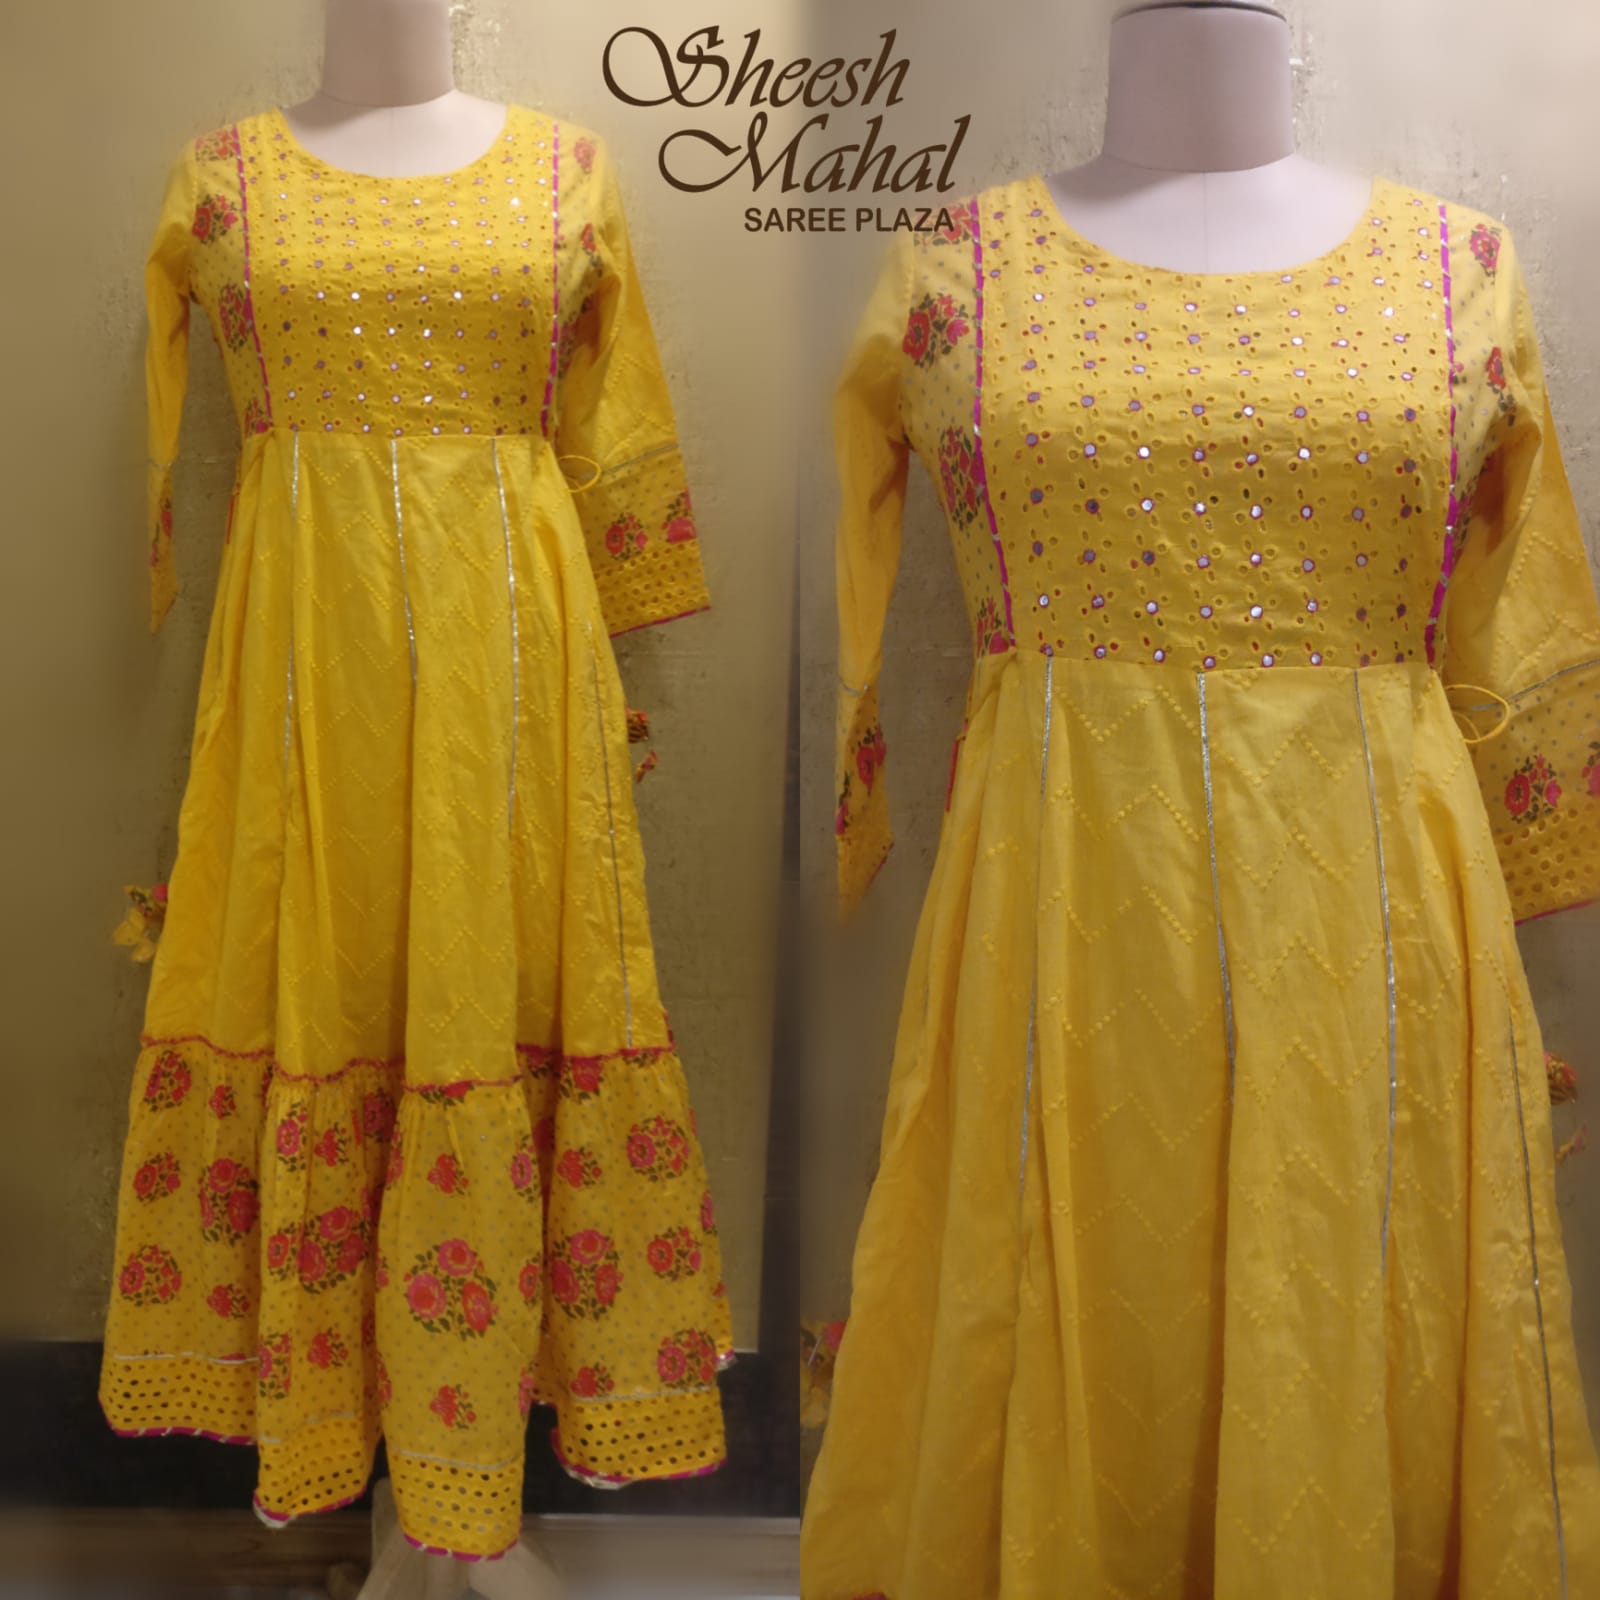 Yellow dress for haldi ceremony ♥️ - AC Fashion with style | Facebook